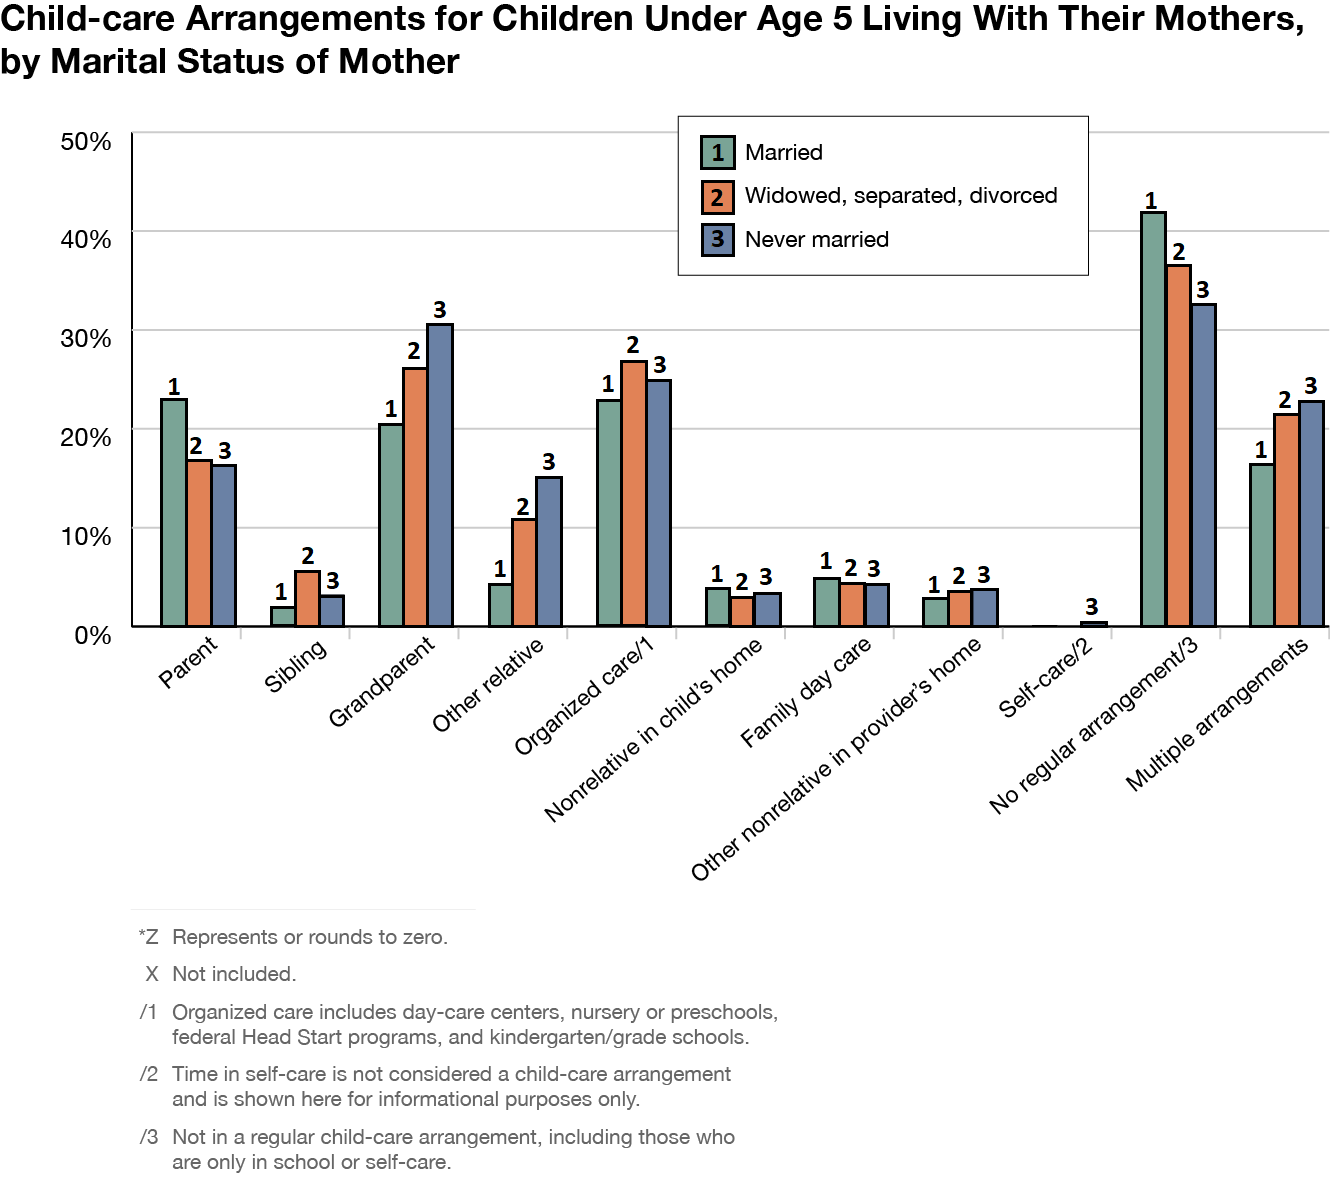 A spreadsheet with data and its corresponding bar chart that indicates various child-care arrangements versus the percentage of mothers with different marital status. The marital status of mothers is defined on the Y axis as Married, Widowed, seperated, divorced, and Never married. The type of child care arrangement is defined on the X axis as Reference parent, Sibling, Other relative, Day care center, Non-relative in child's home etc.